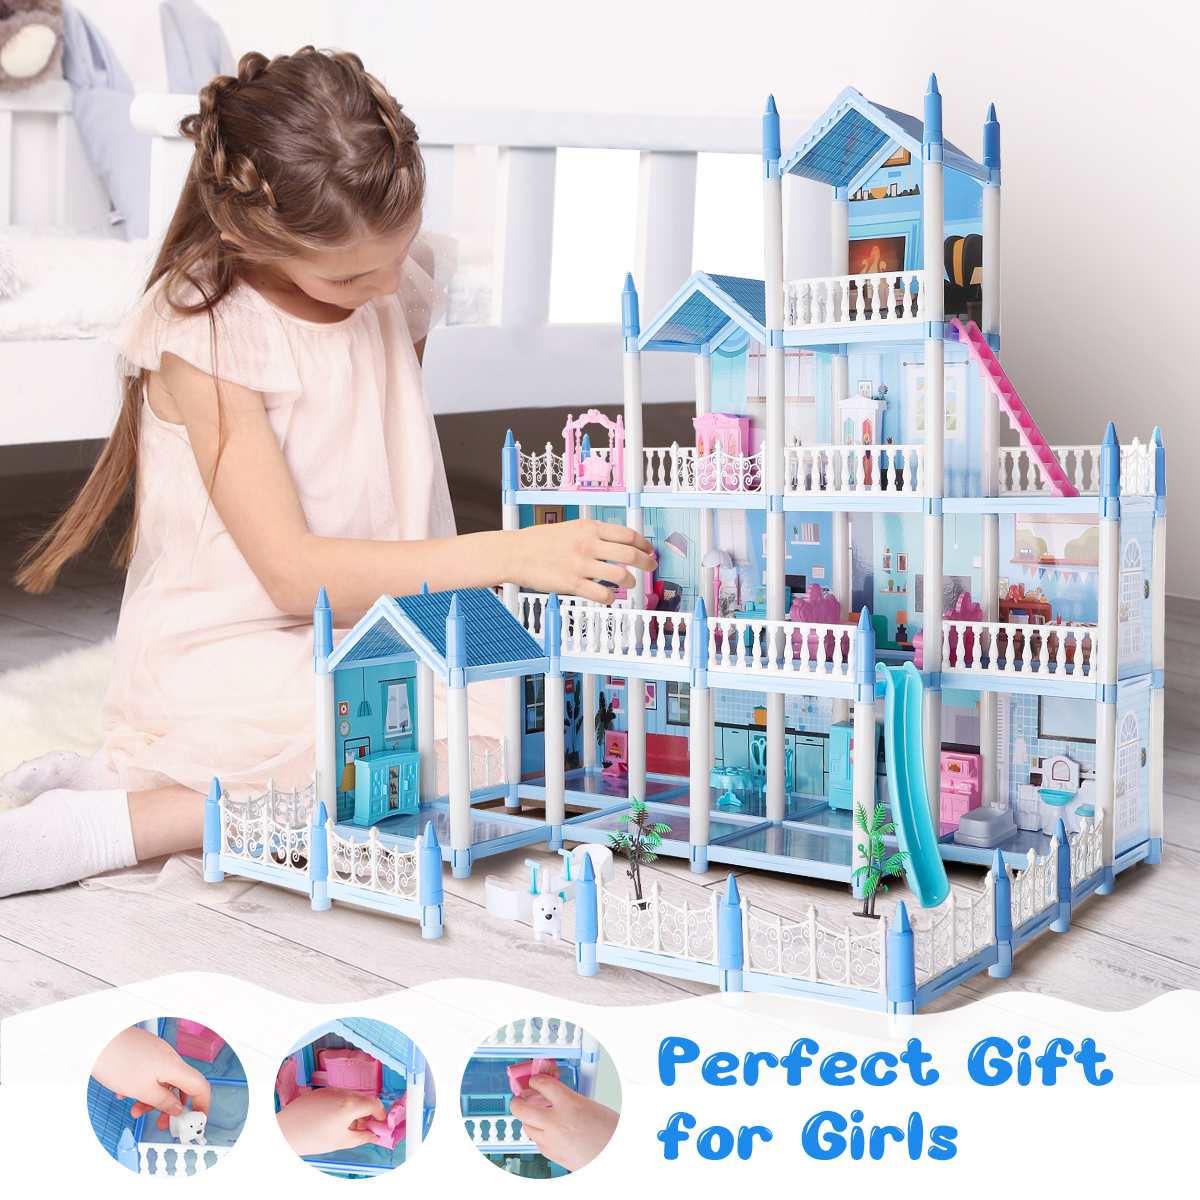 Doll House, Dream House Playset with 100+ Furniture & Accessories, 4 Stories 14 Rooms Building Toys with Movable Slides, Stairs, Pets, Cottage, DIY Creative Gift for 3 4 5 6+ Year Old Girls Toddlers - image 2 of 7